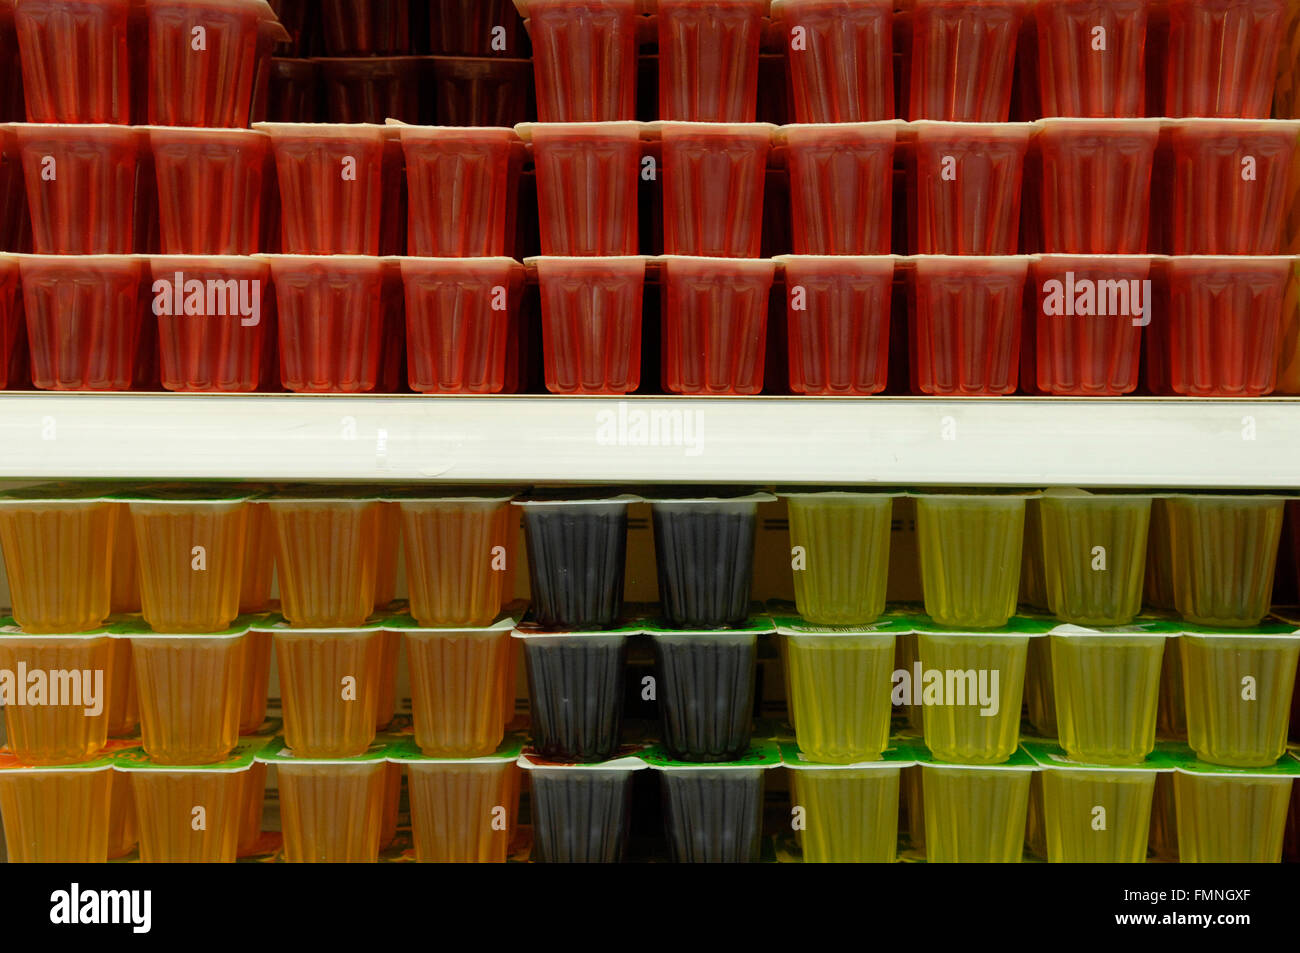 A close up image of a selection of jelly's on display in a supermarket Stock Photo